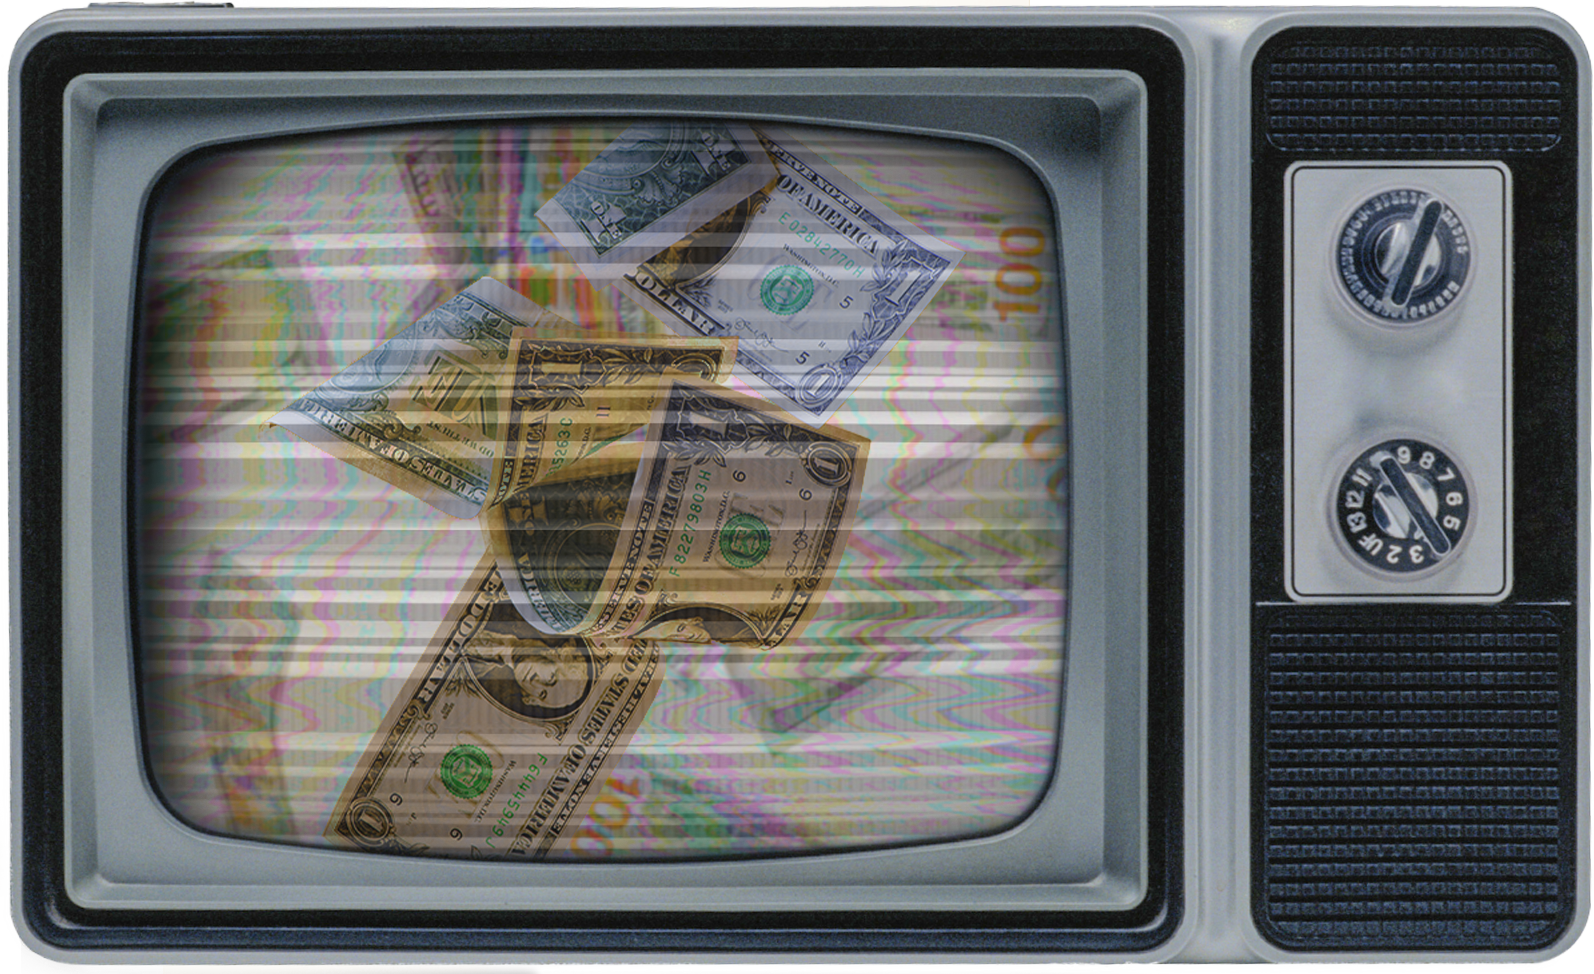 Retro television with image of dollars